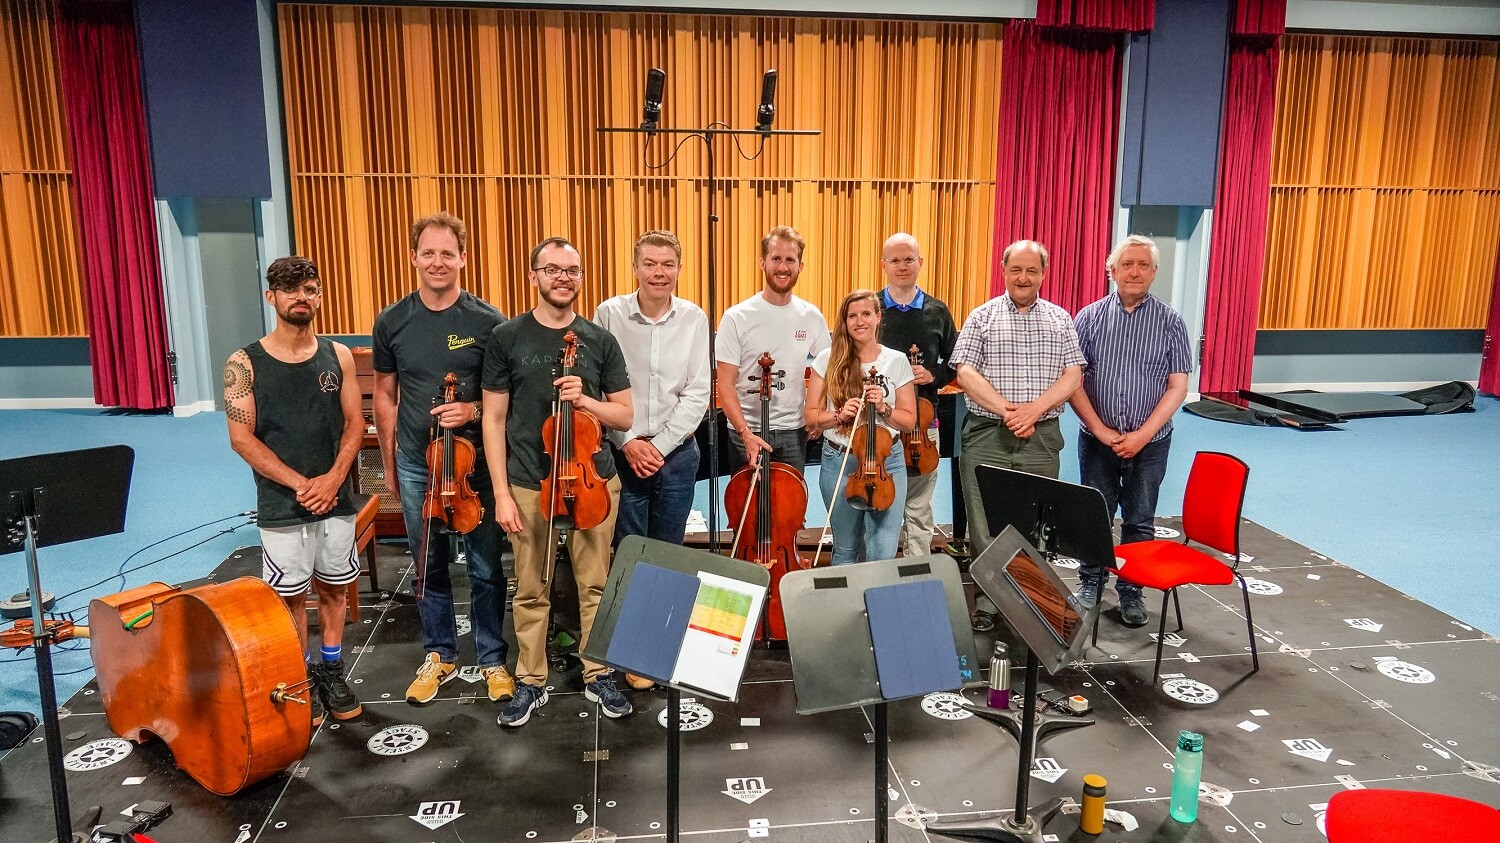 Orchestra lineup including sound engineer tony faulkner on the right hand side